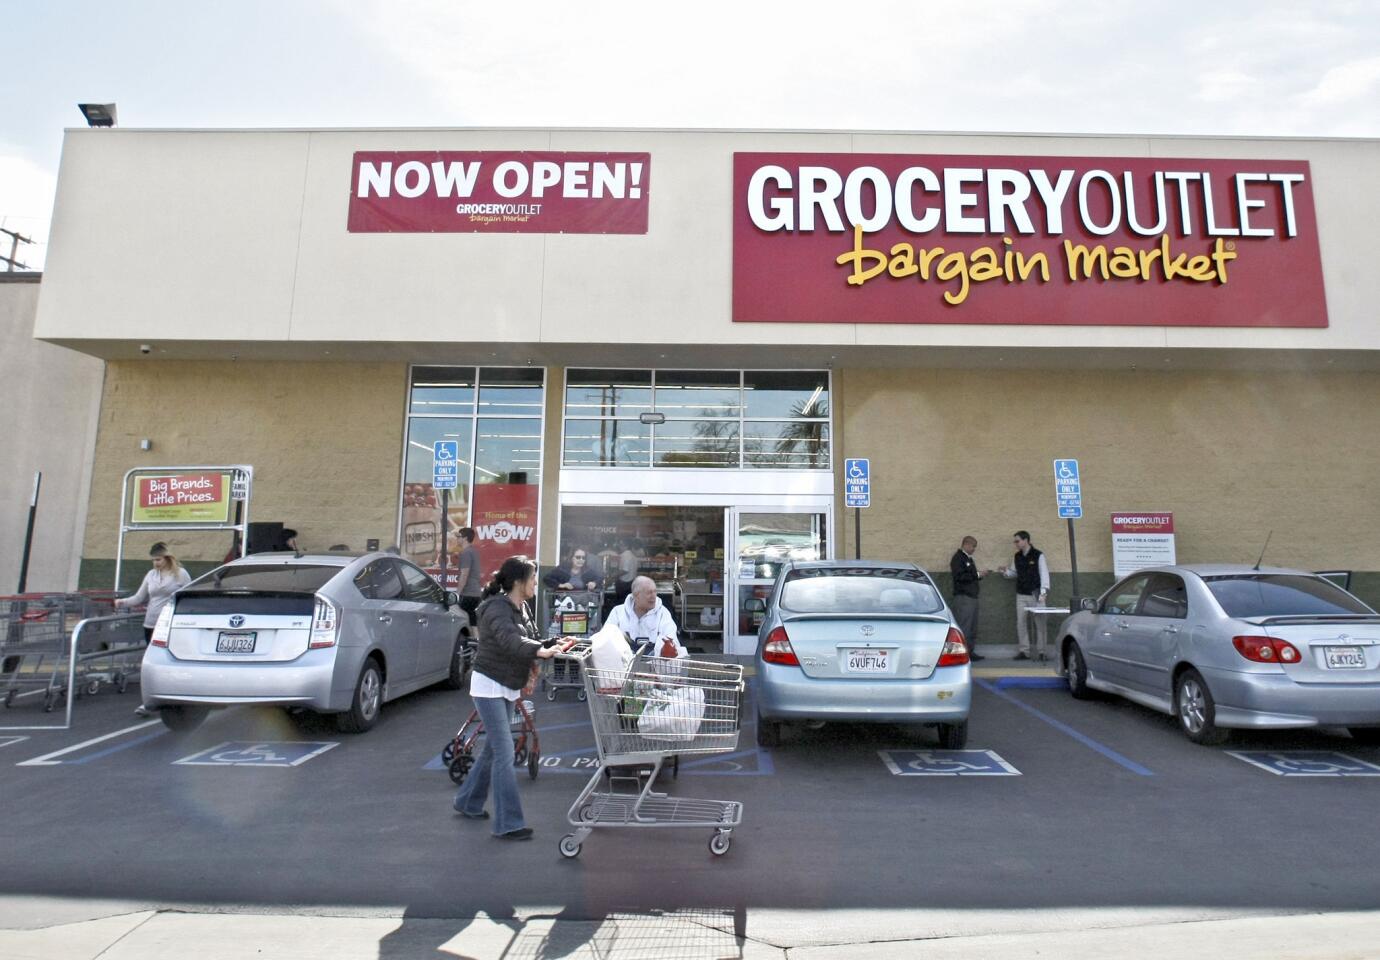 The Grocery Outlet, located at the old Fresh & Easy Market location on W. Verdugo Ave., held it's grand opening in Burbank on Thursday, Feb. 16, 2017.